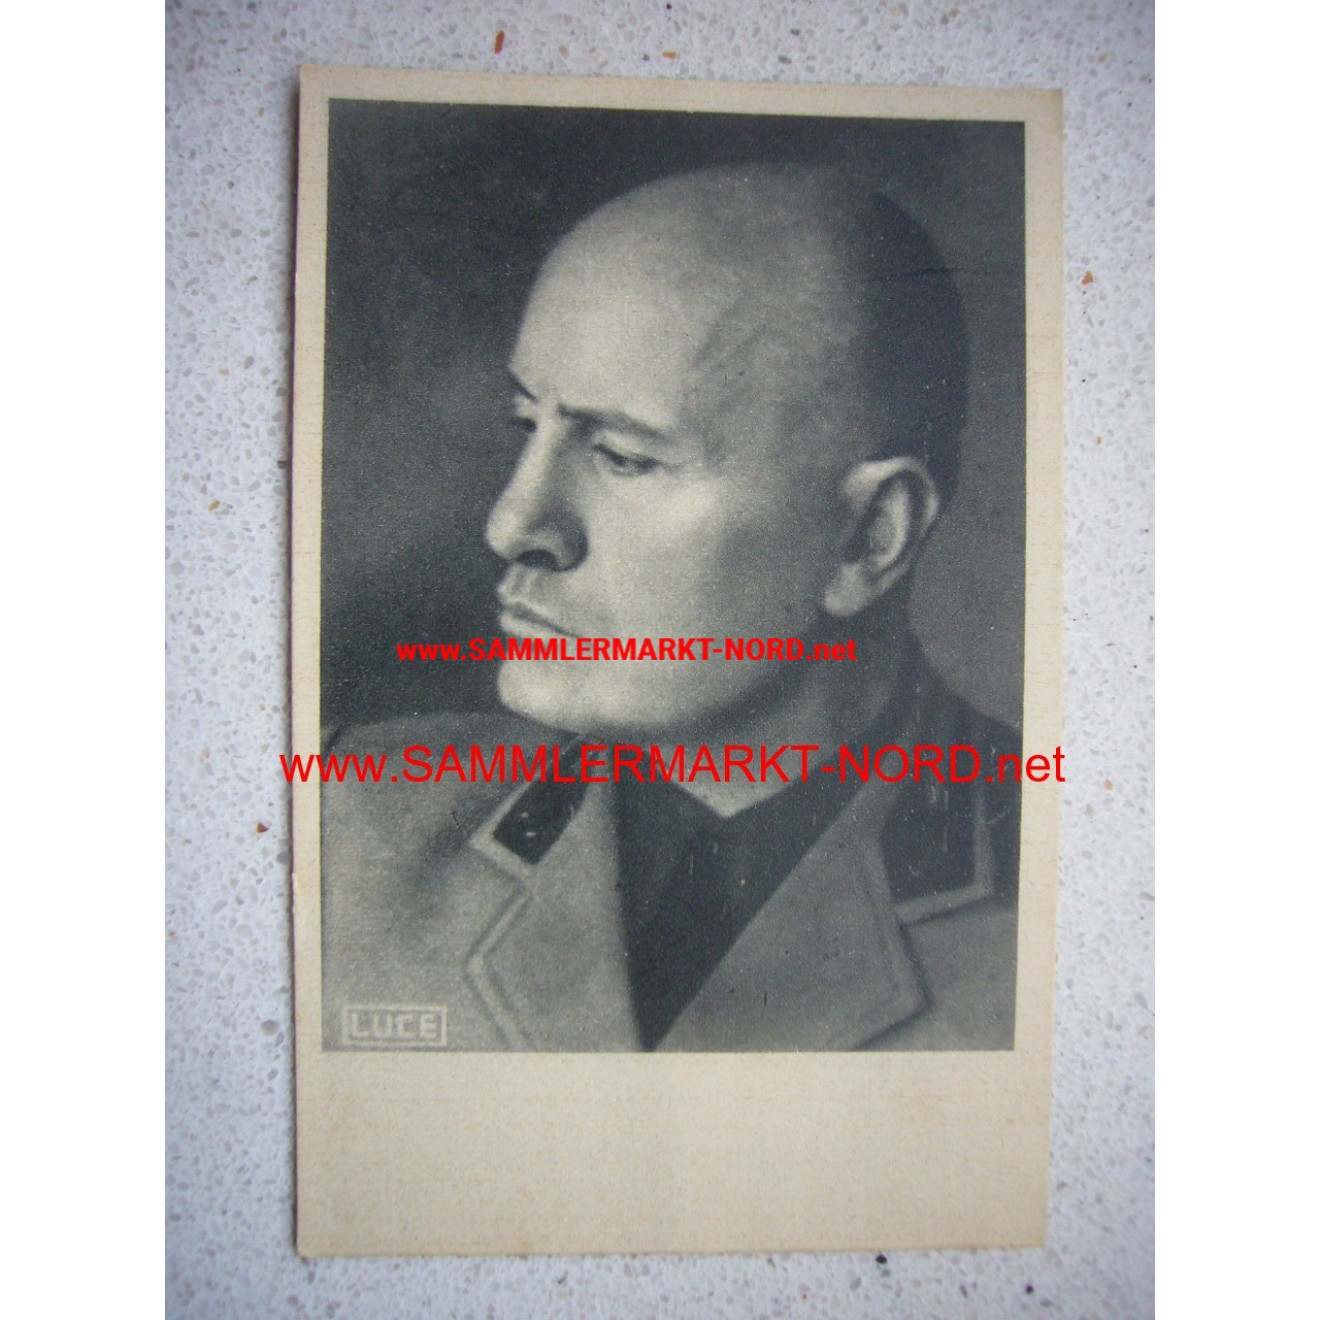 The Duce (Mussolini / Italy) - Postcard